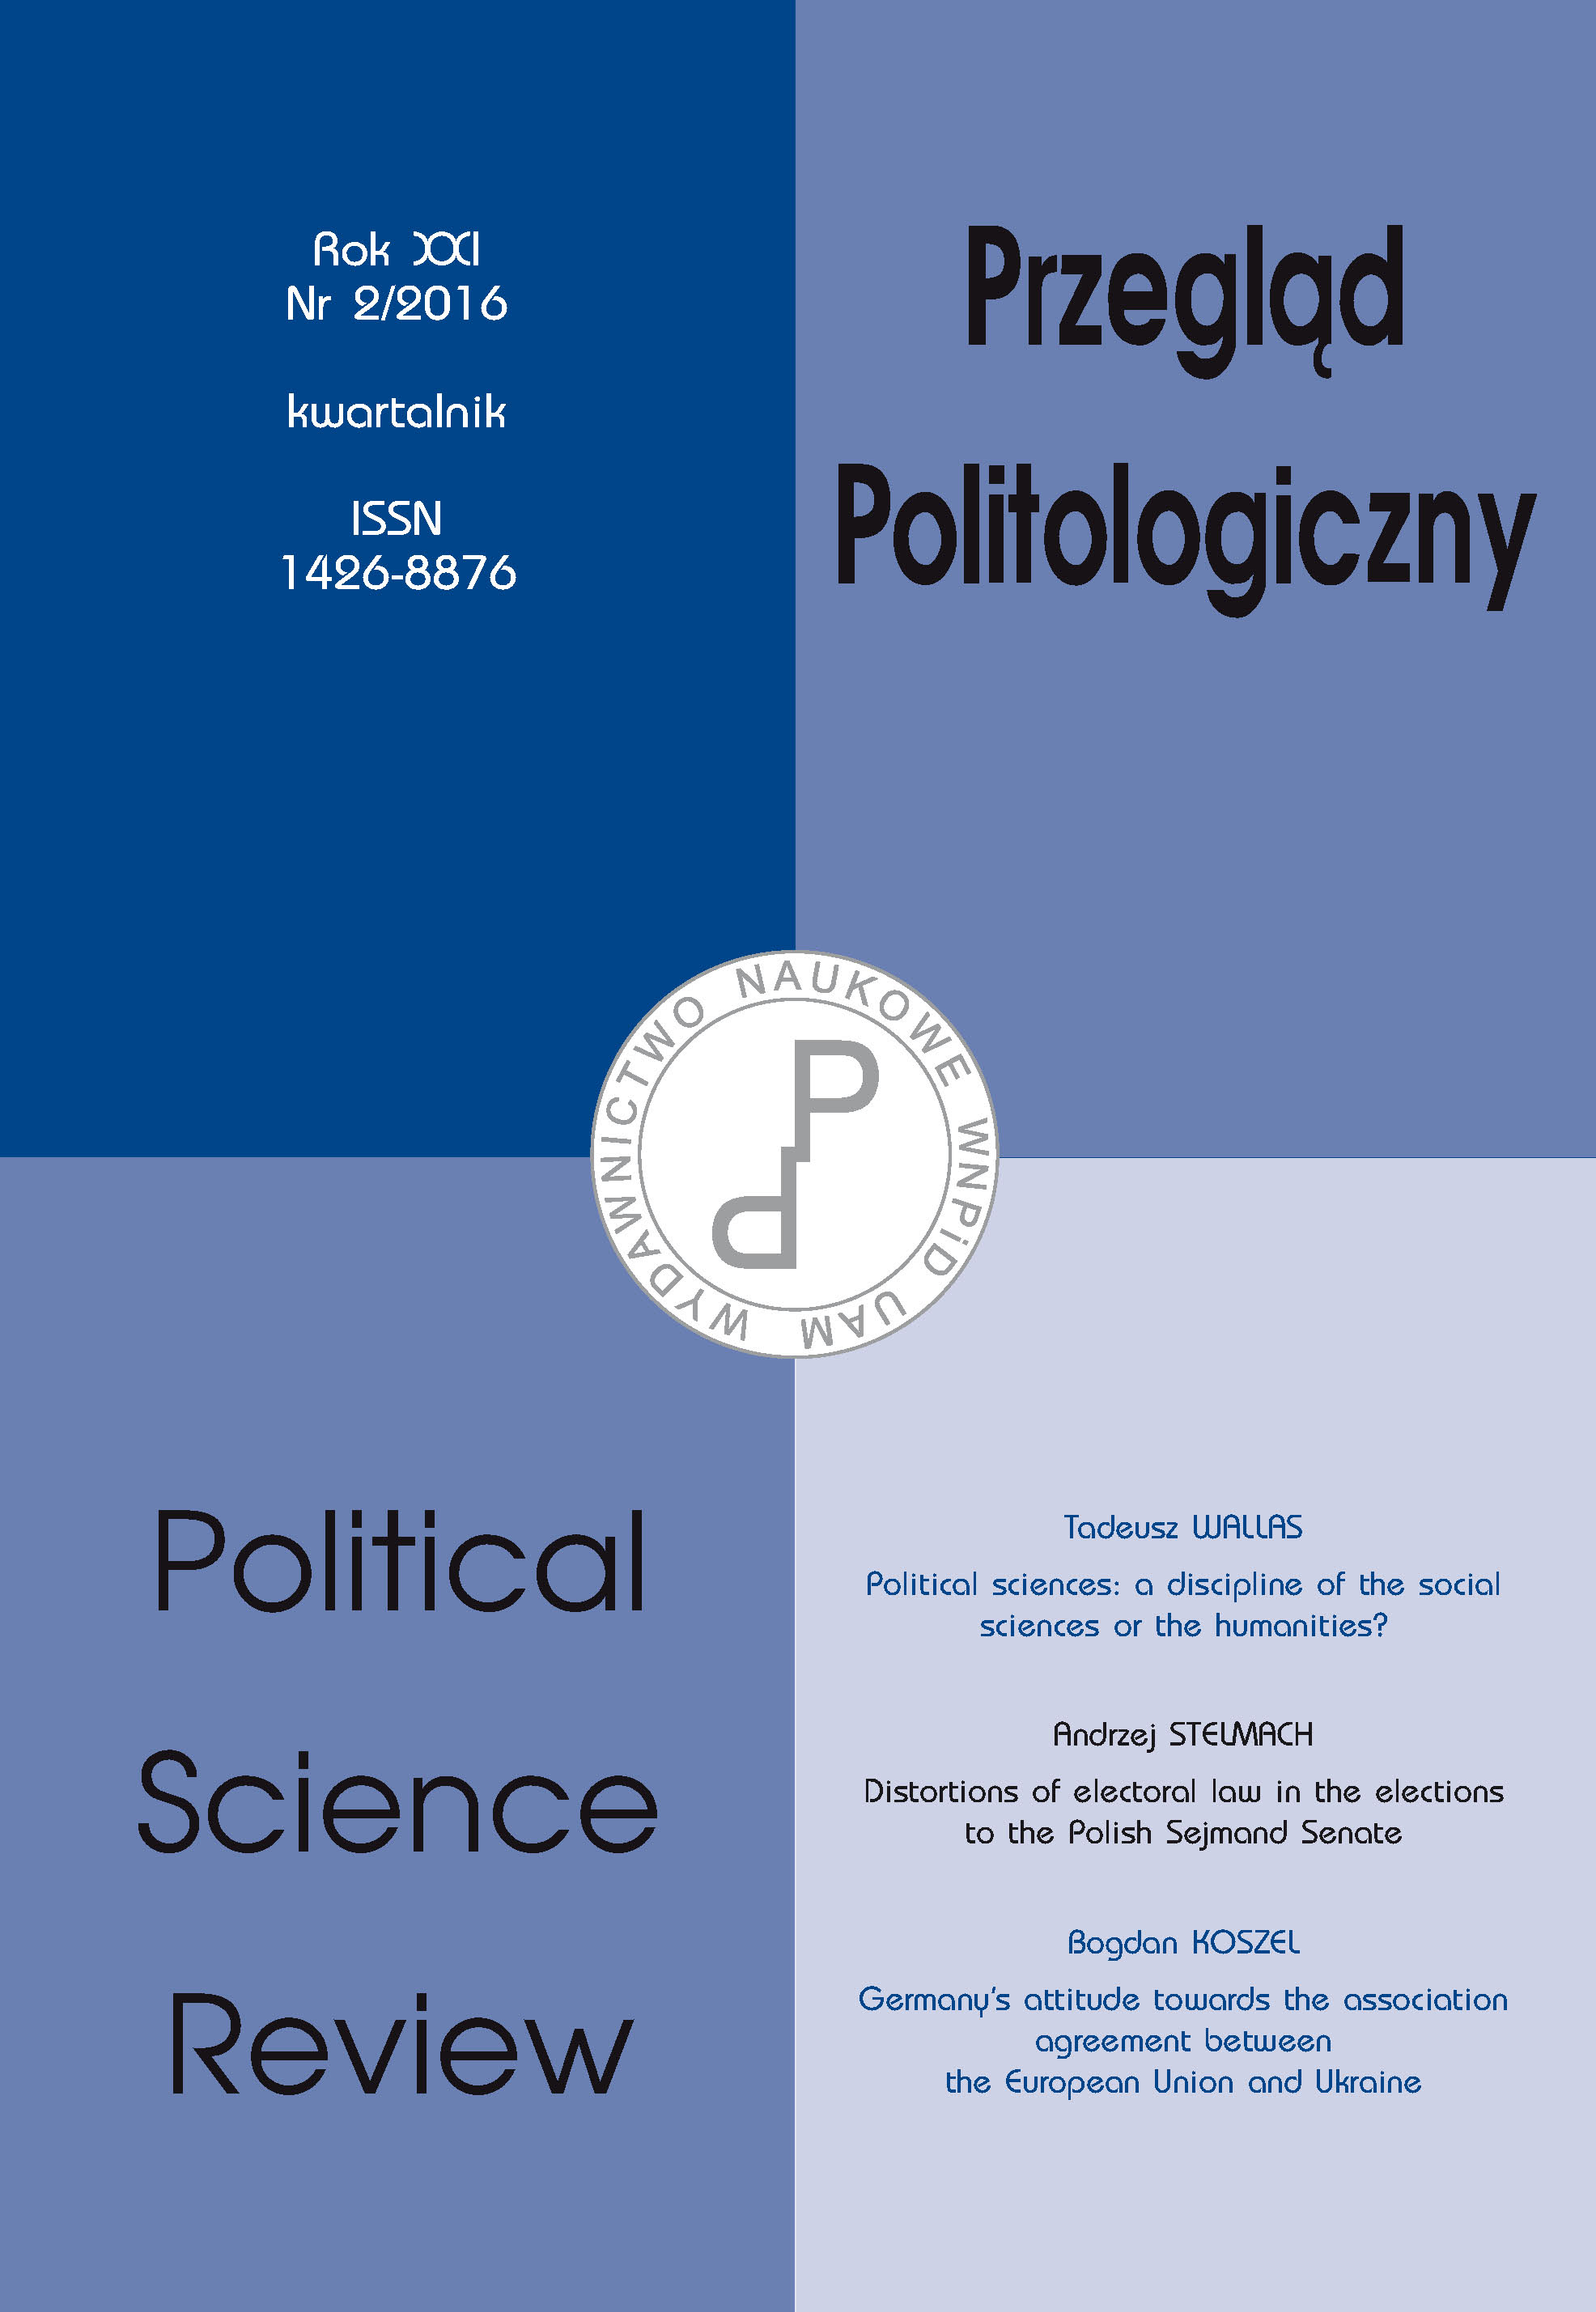 Political sciences: a discipline of the social sciences or the humanities?